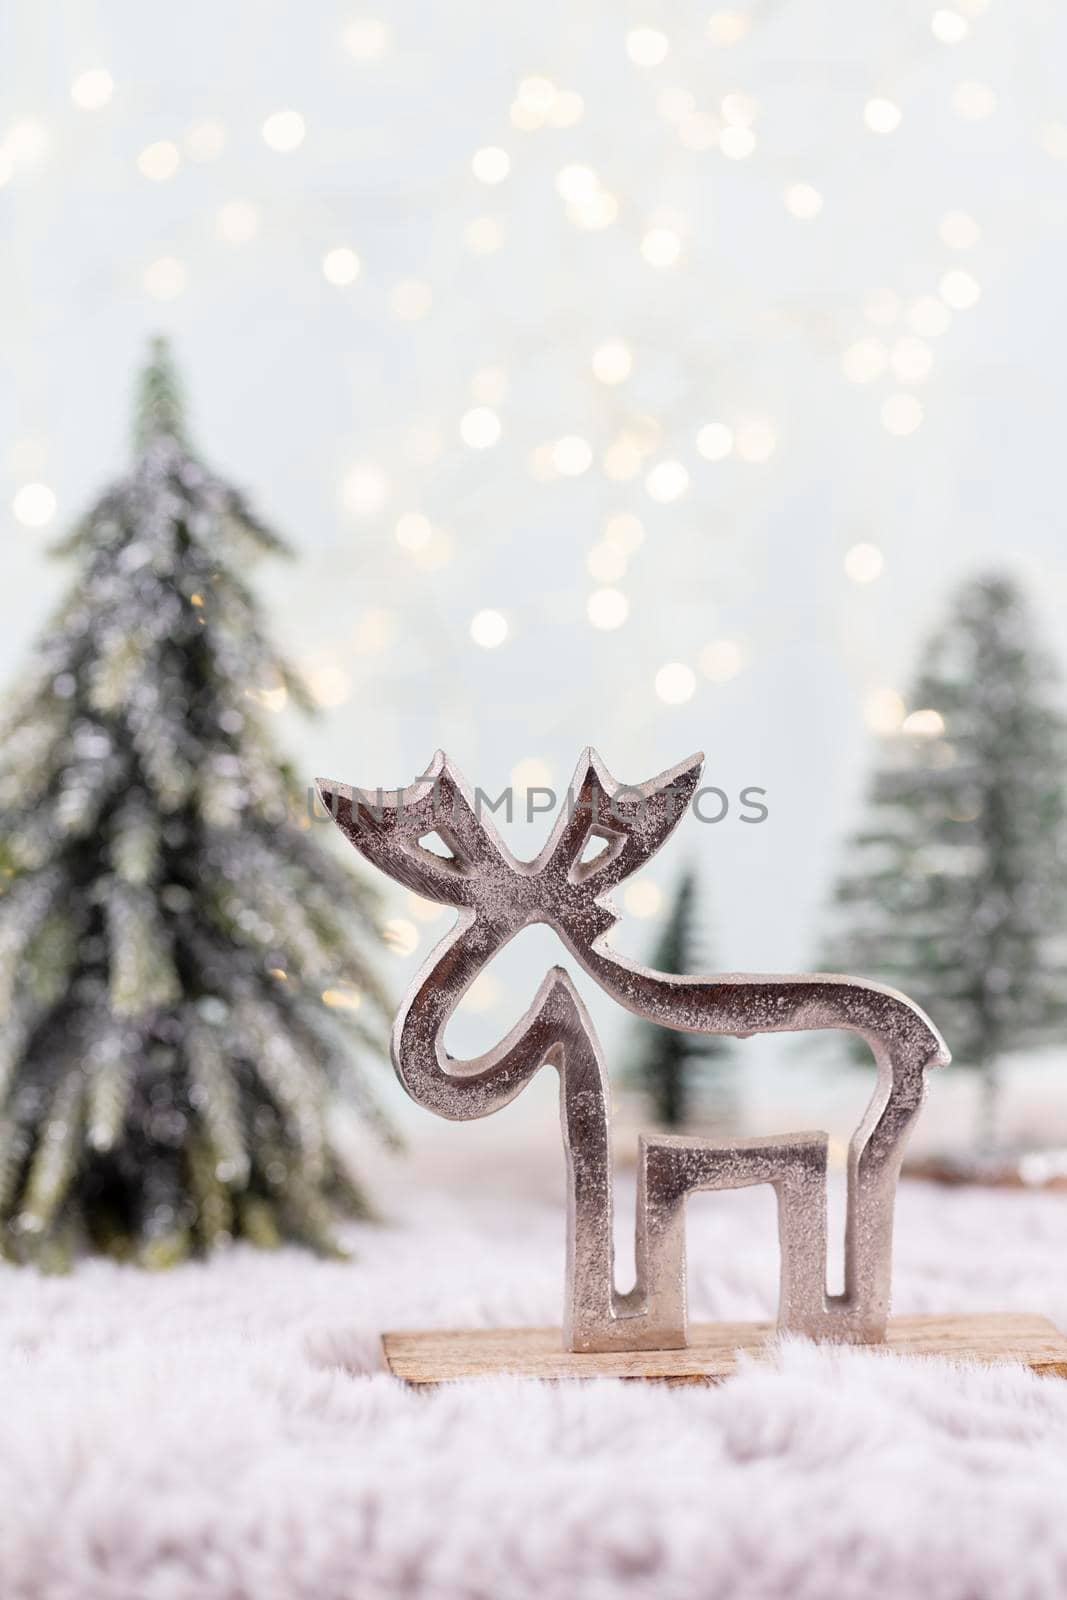 Festive background with christmas decoration. Copy space, winter holidays greeting card, flat lay, top view.